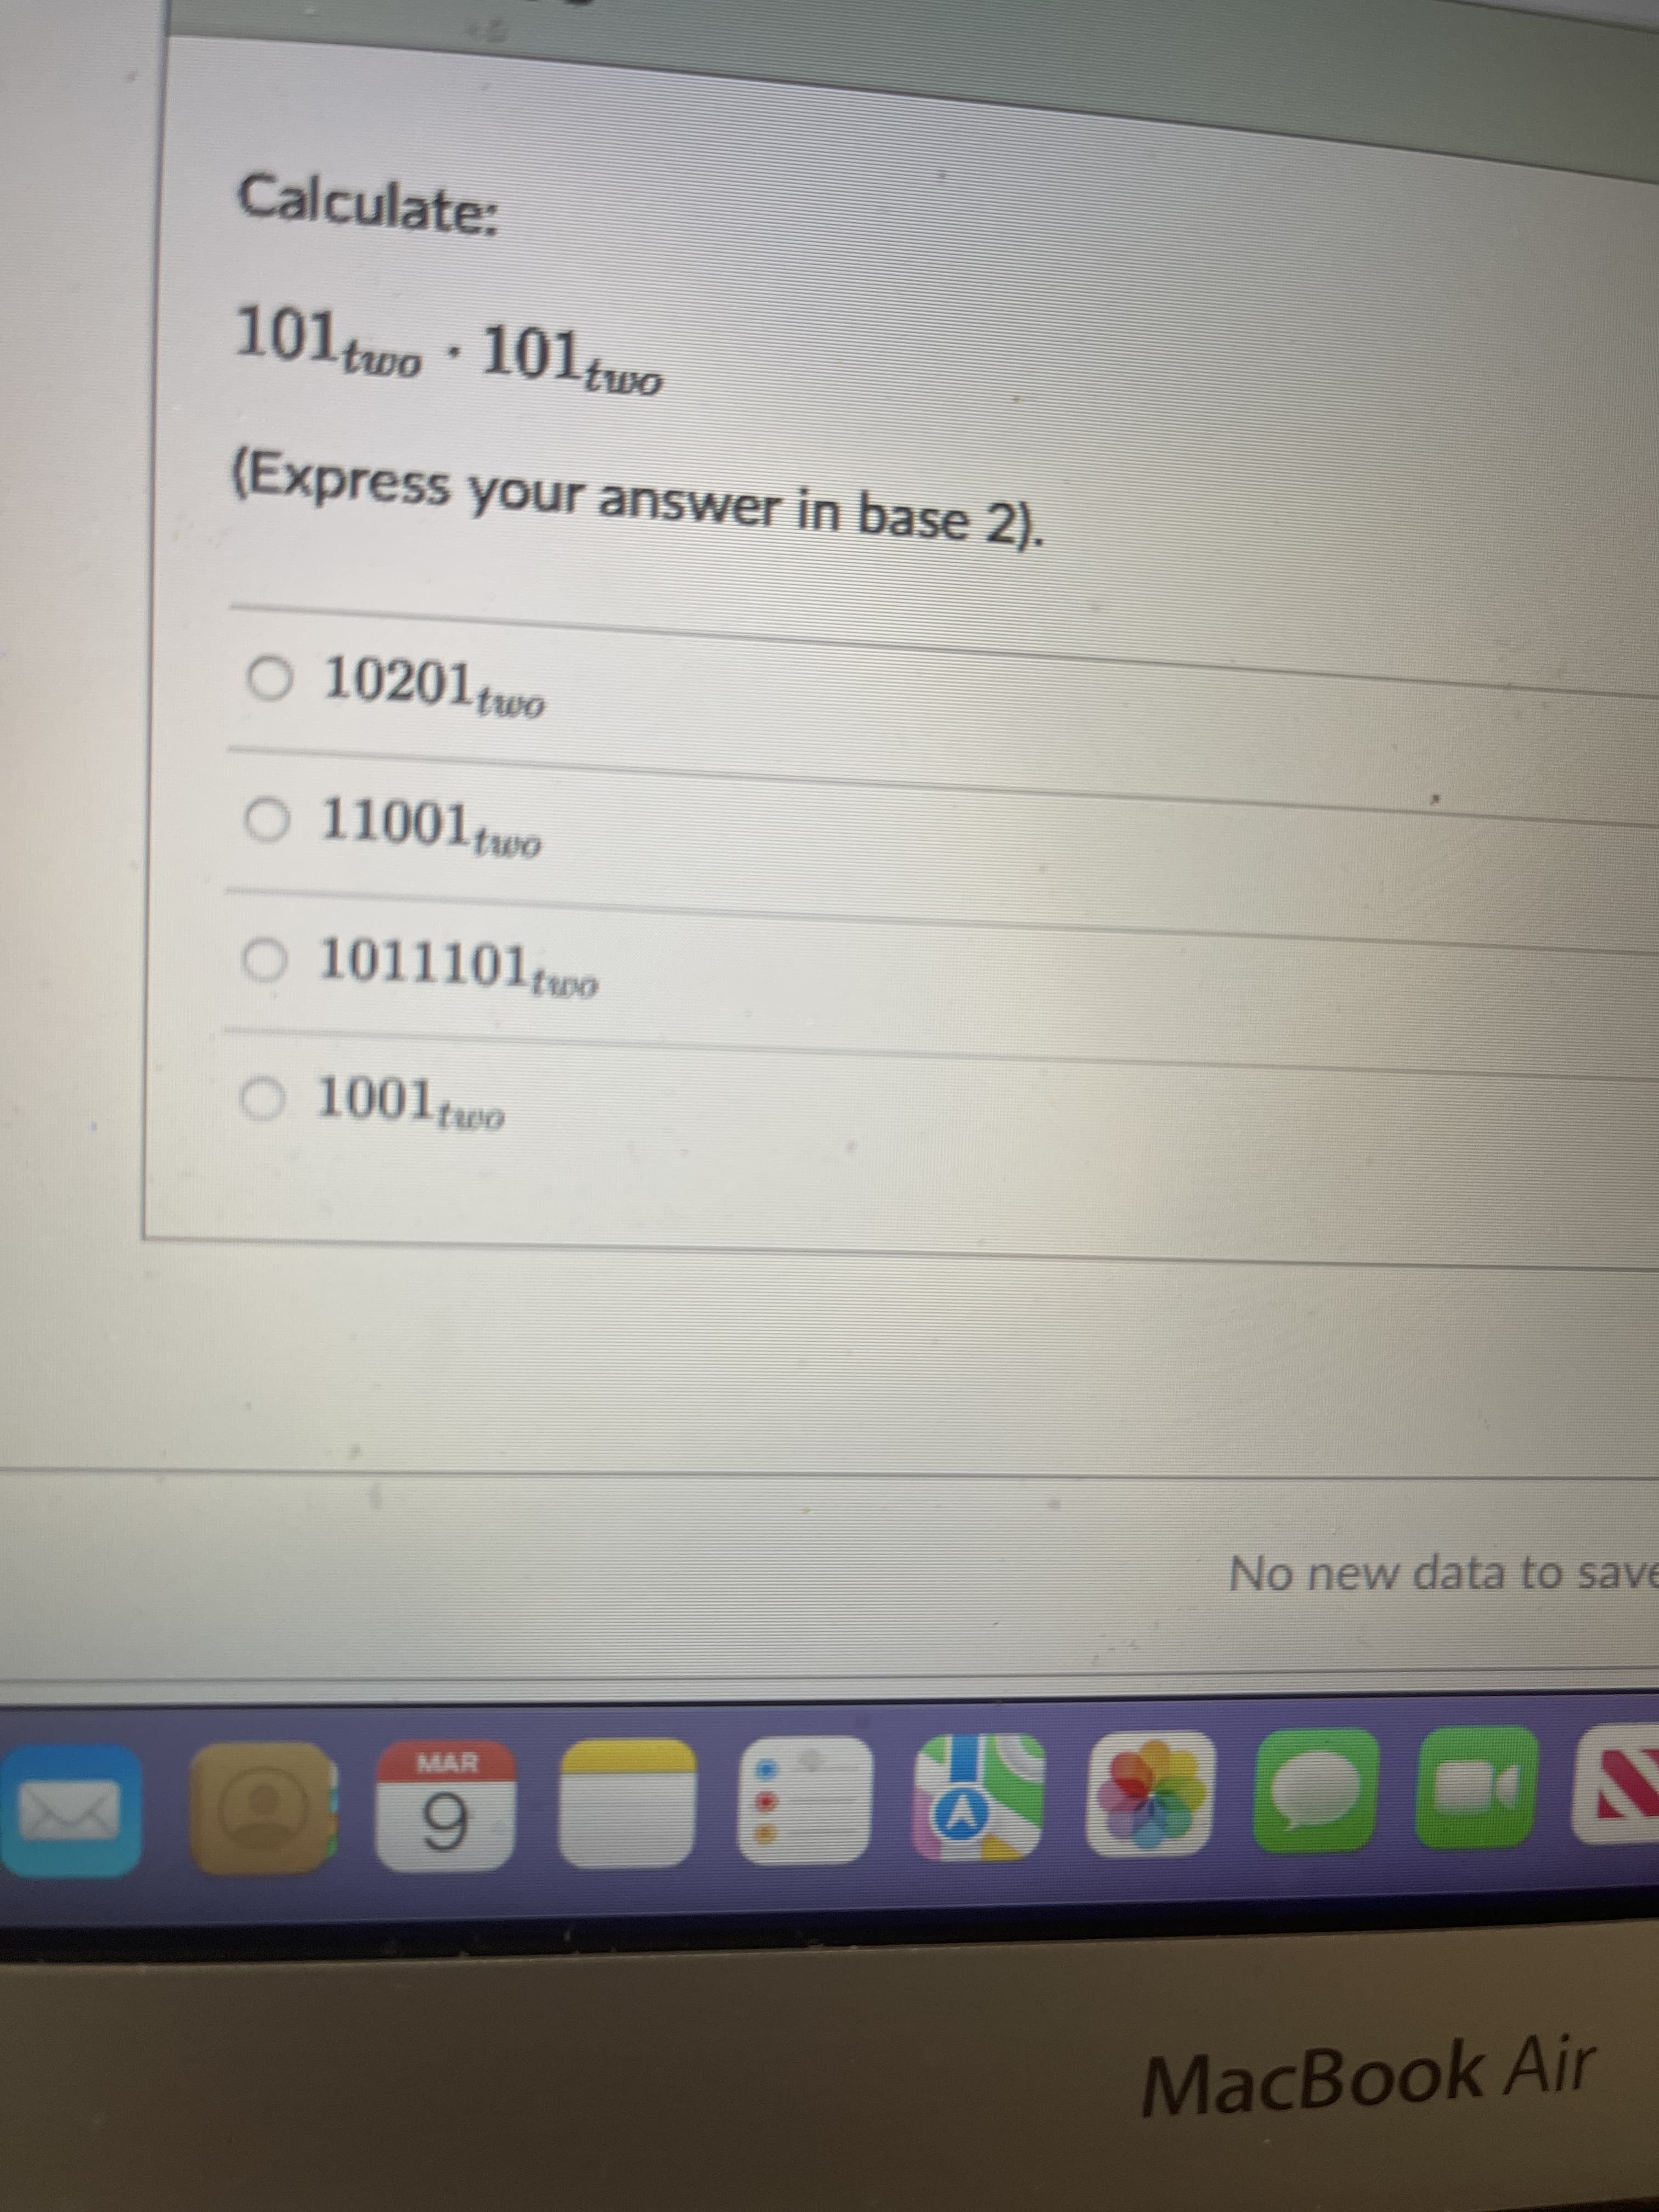 Calculate:
101two 101tuwo
(Express your answer in base 2).
o 10201two
2 11001two
O 1011101two
O 1001two
No new data to save
NO
6.
MacBook Air
